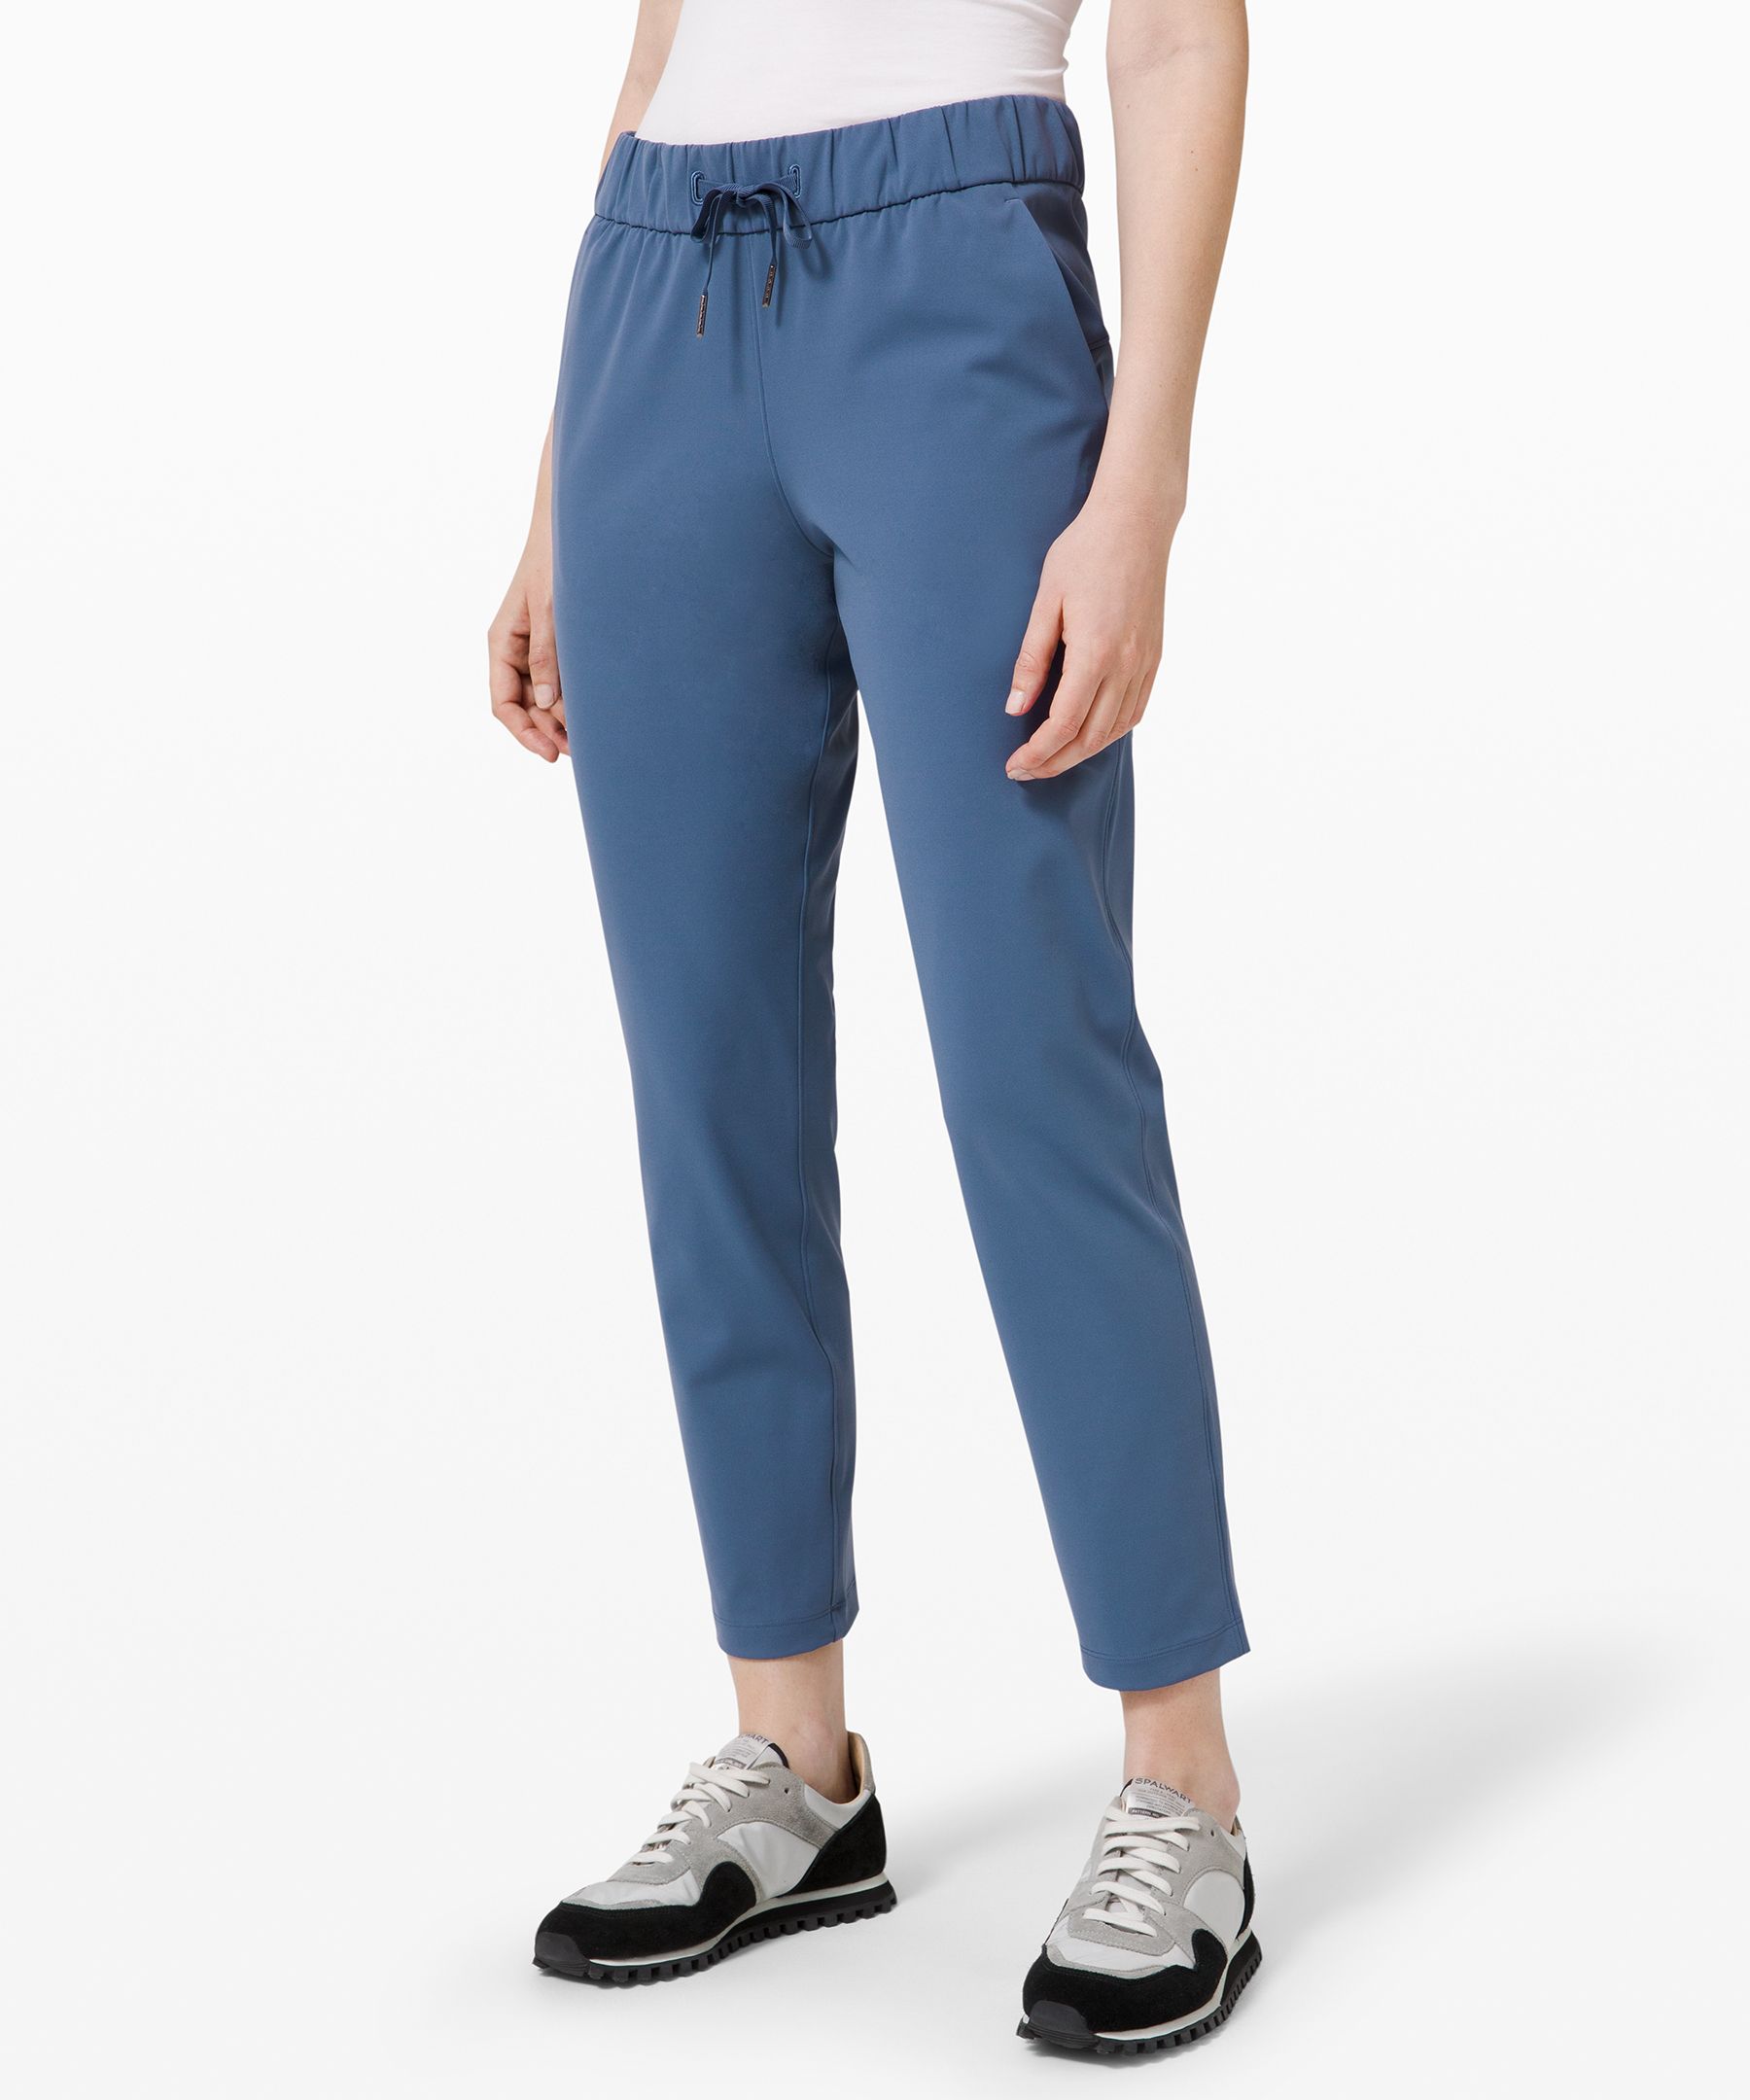 Lululemon On The Fly 7/8 Pant 27" In Navy